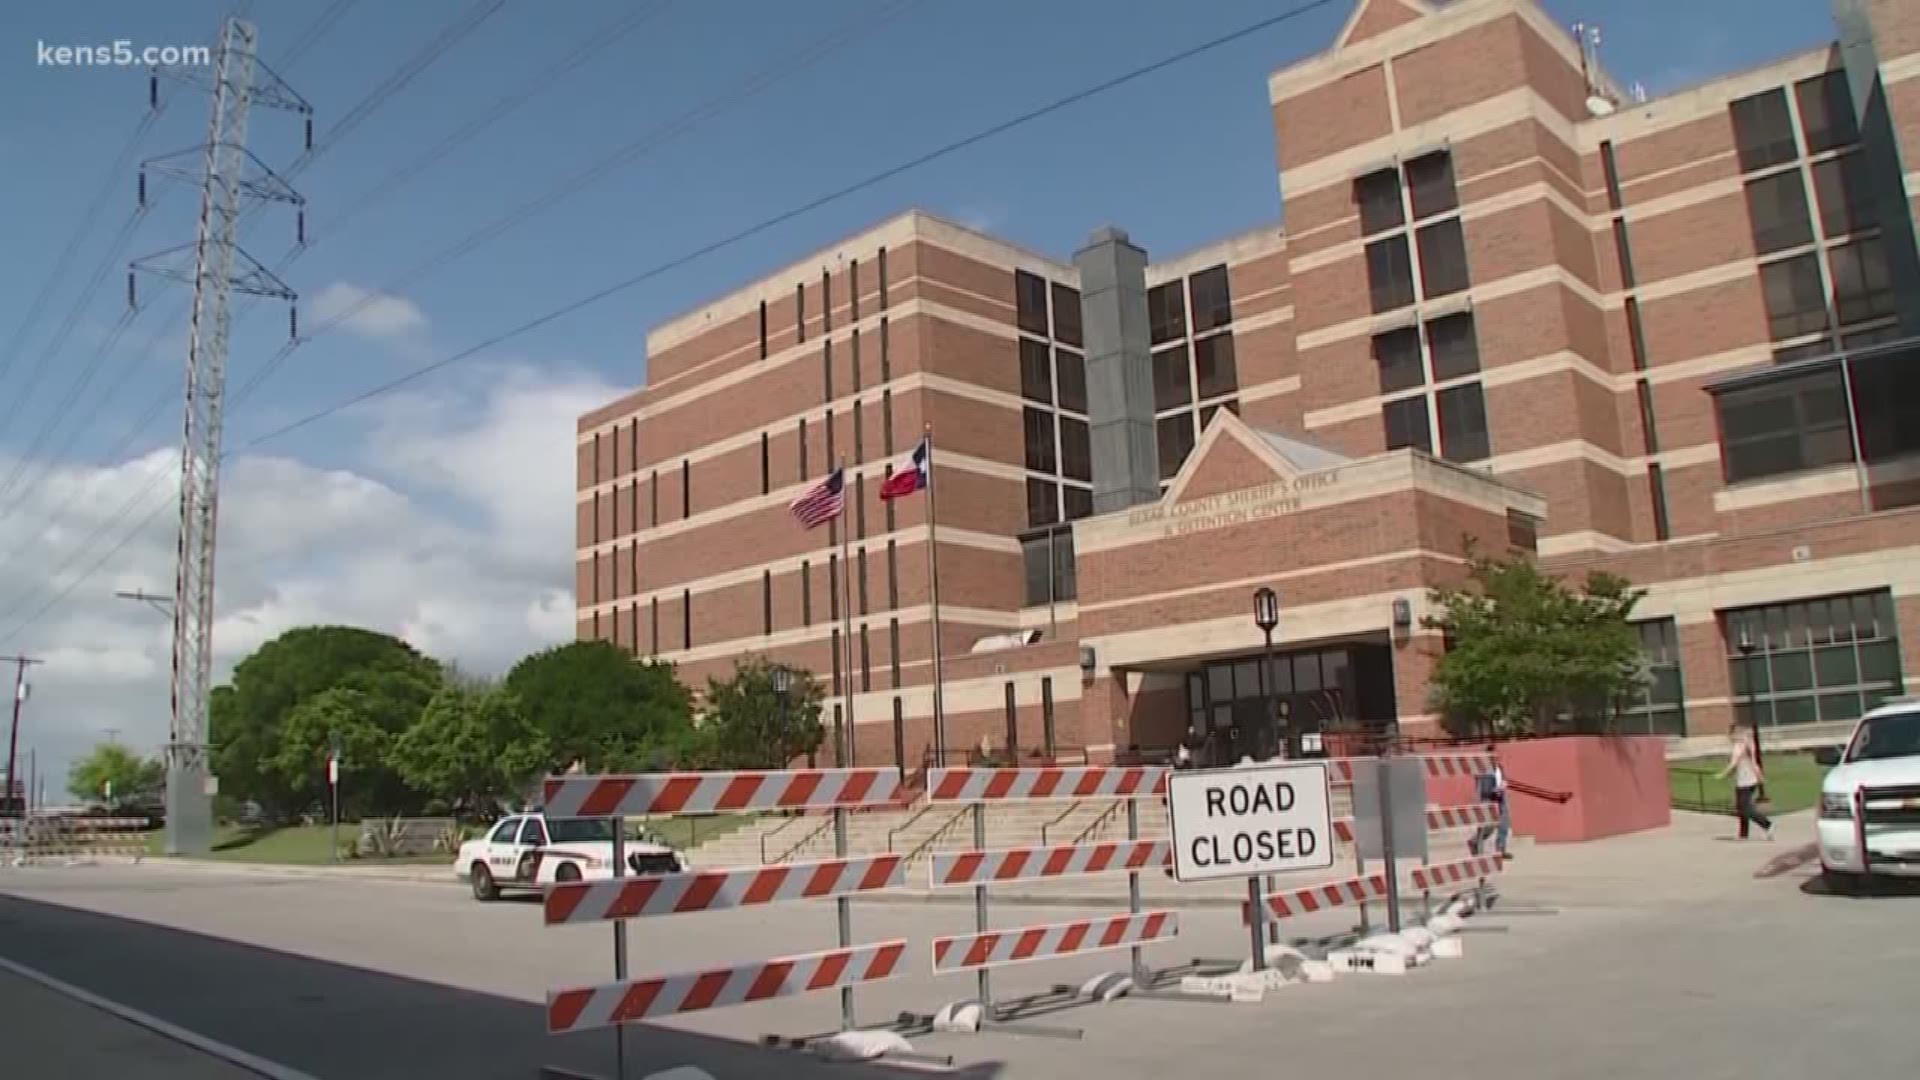 After escapes and poor reviews at the Bexar County Jail, new, more experienced officials are being appointed to oversee the facility.